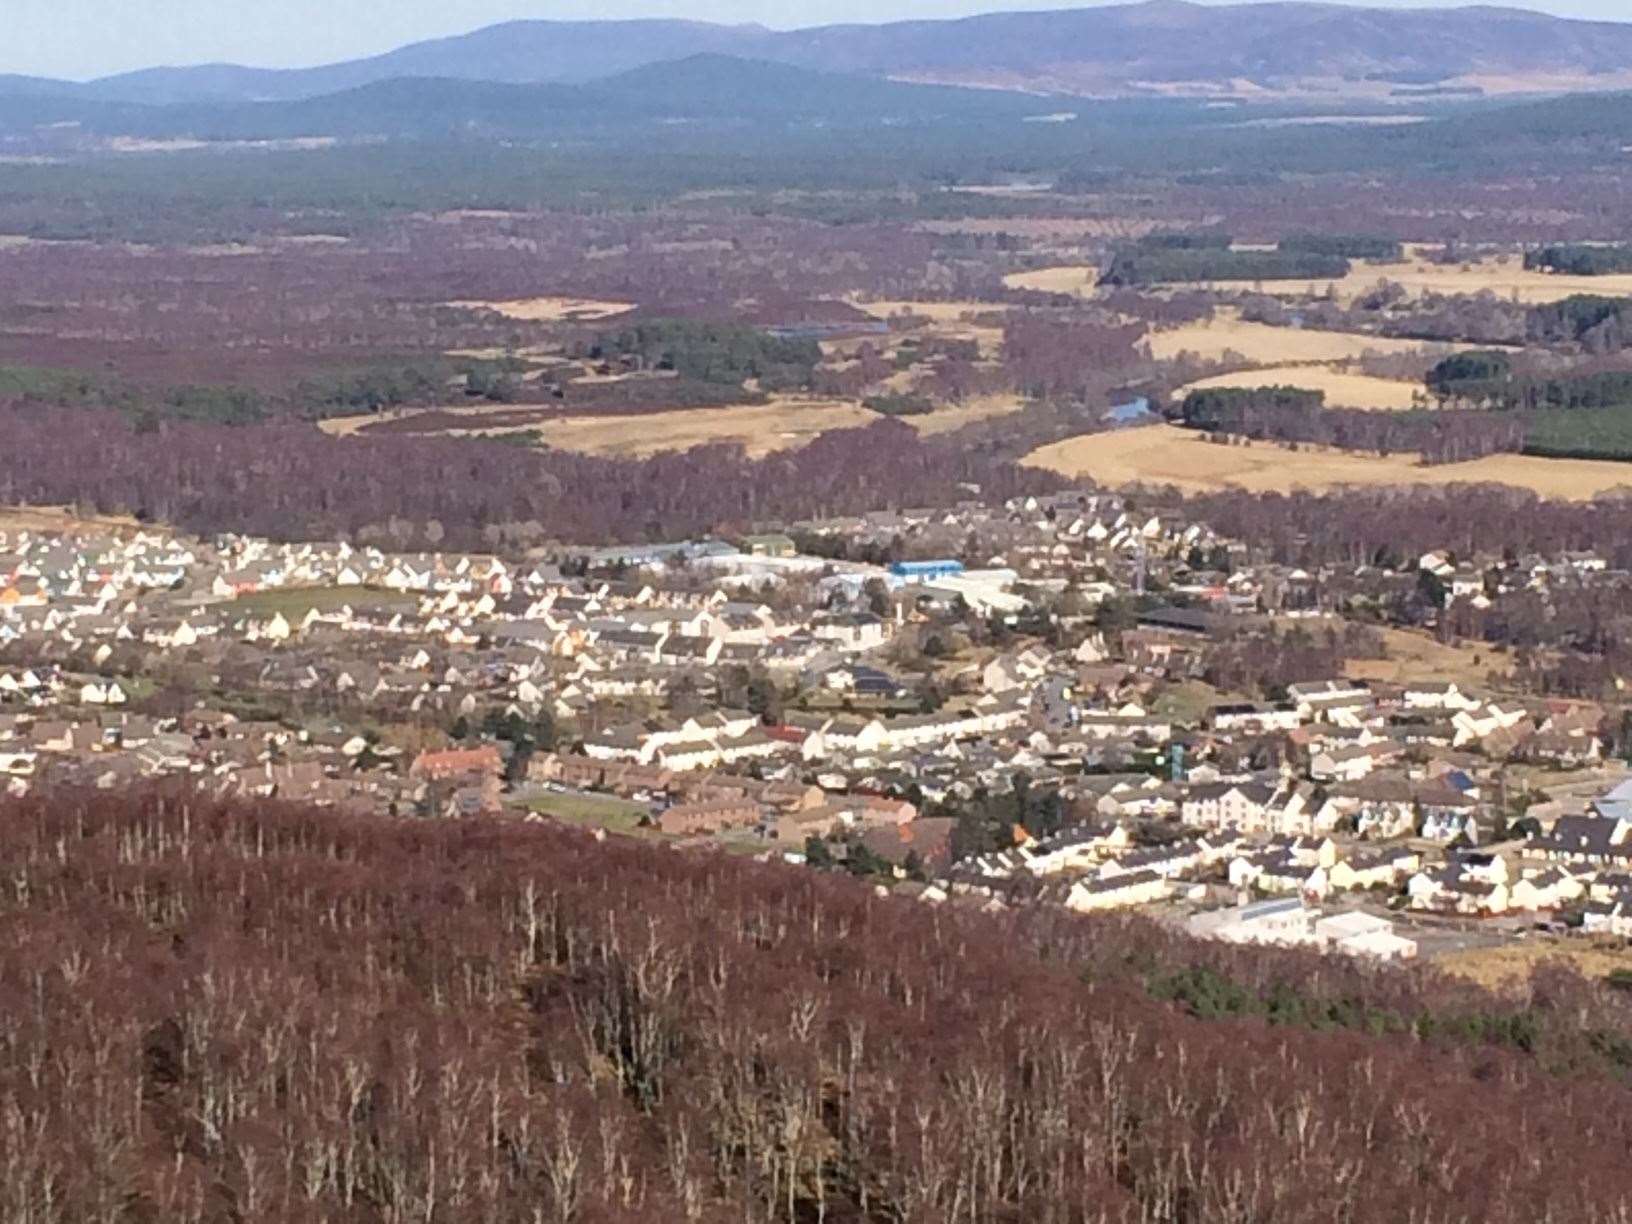 Community councillors are being sought for Aviemore and the surrounding area.